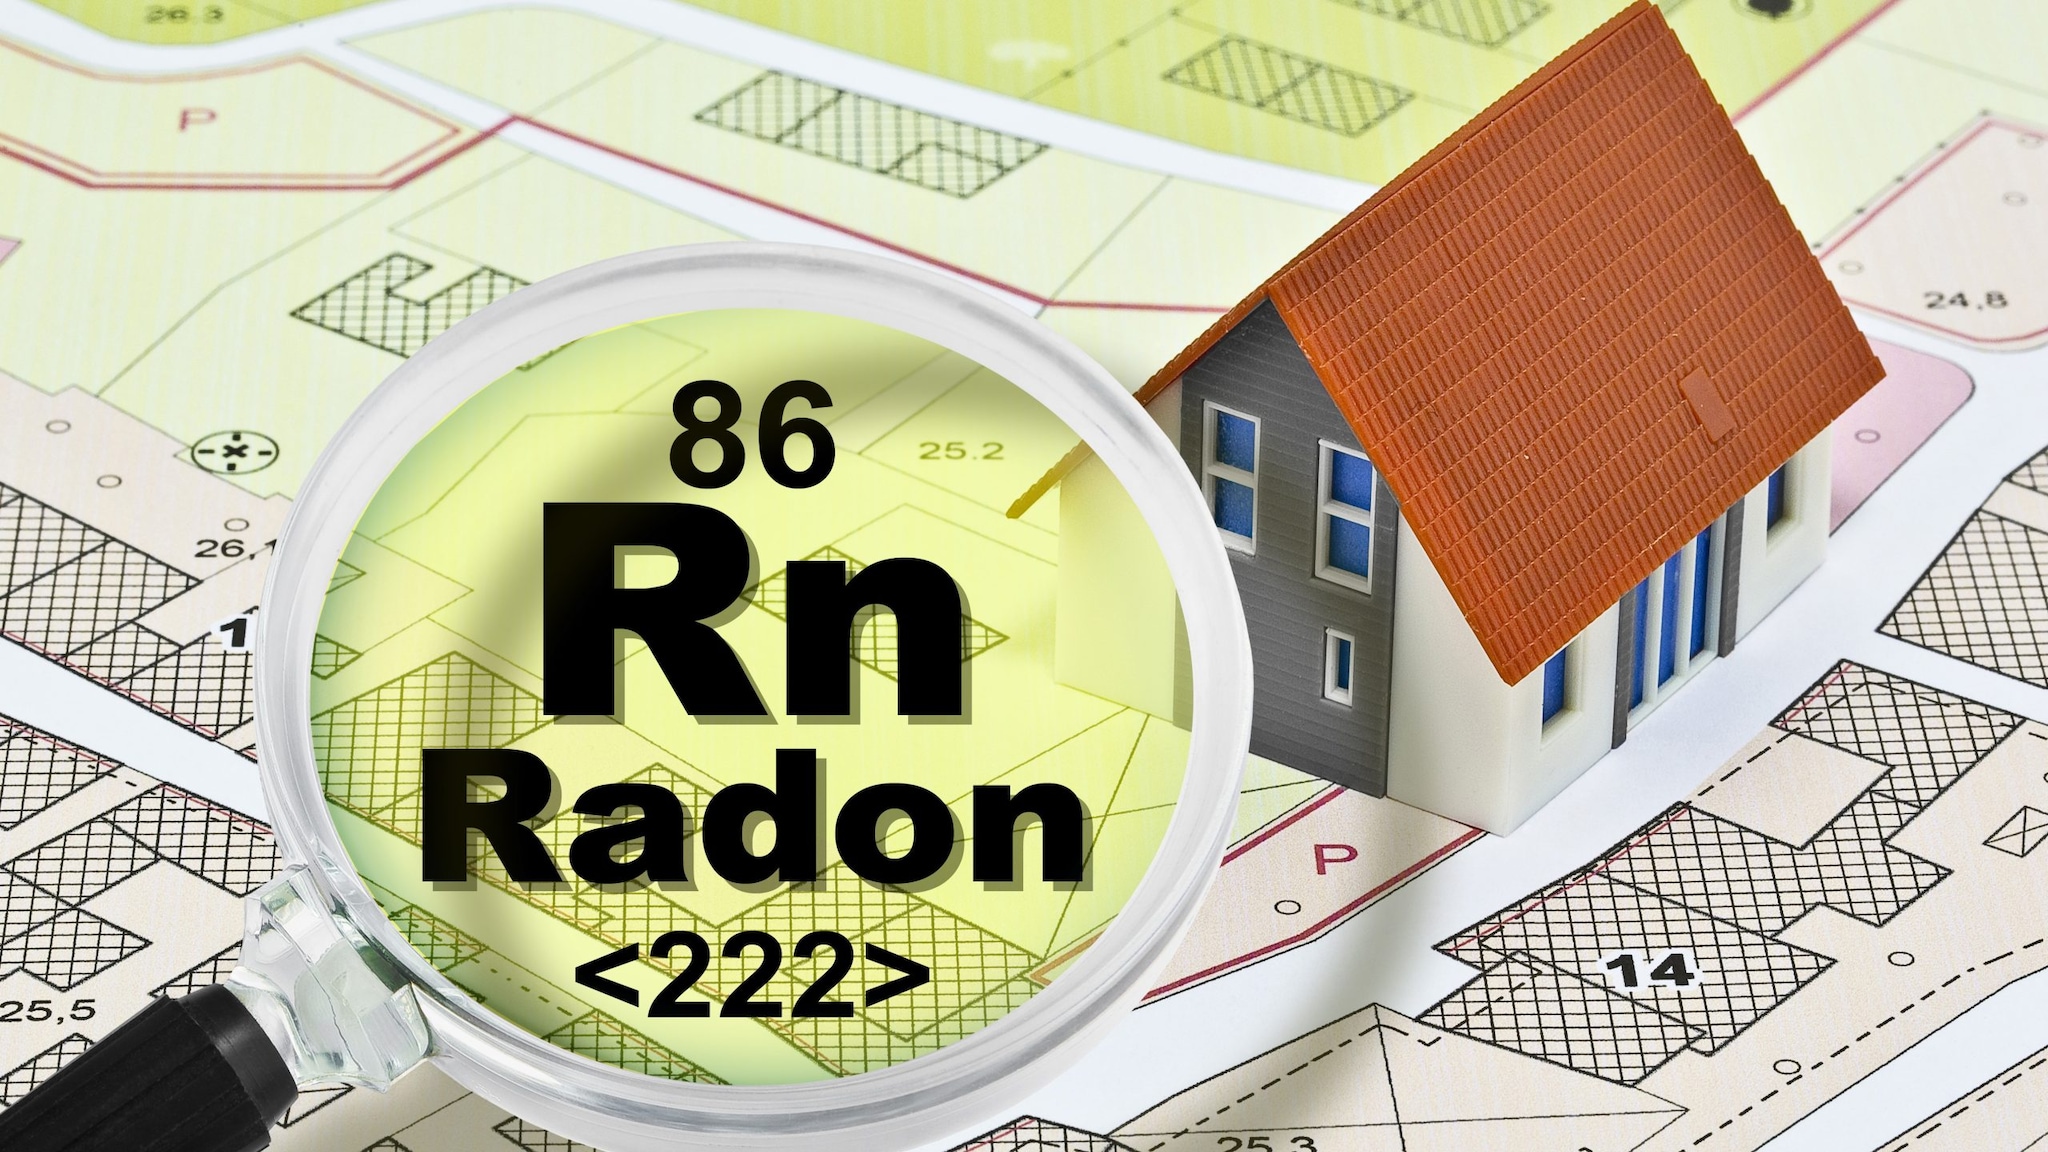 A gamepiece house sits on top of a neighborhood map. A magnifying glass hovers over the map with text in the lens that reads, "86 Rn Radon "